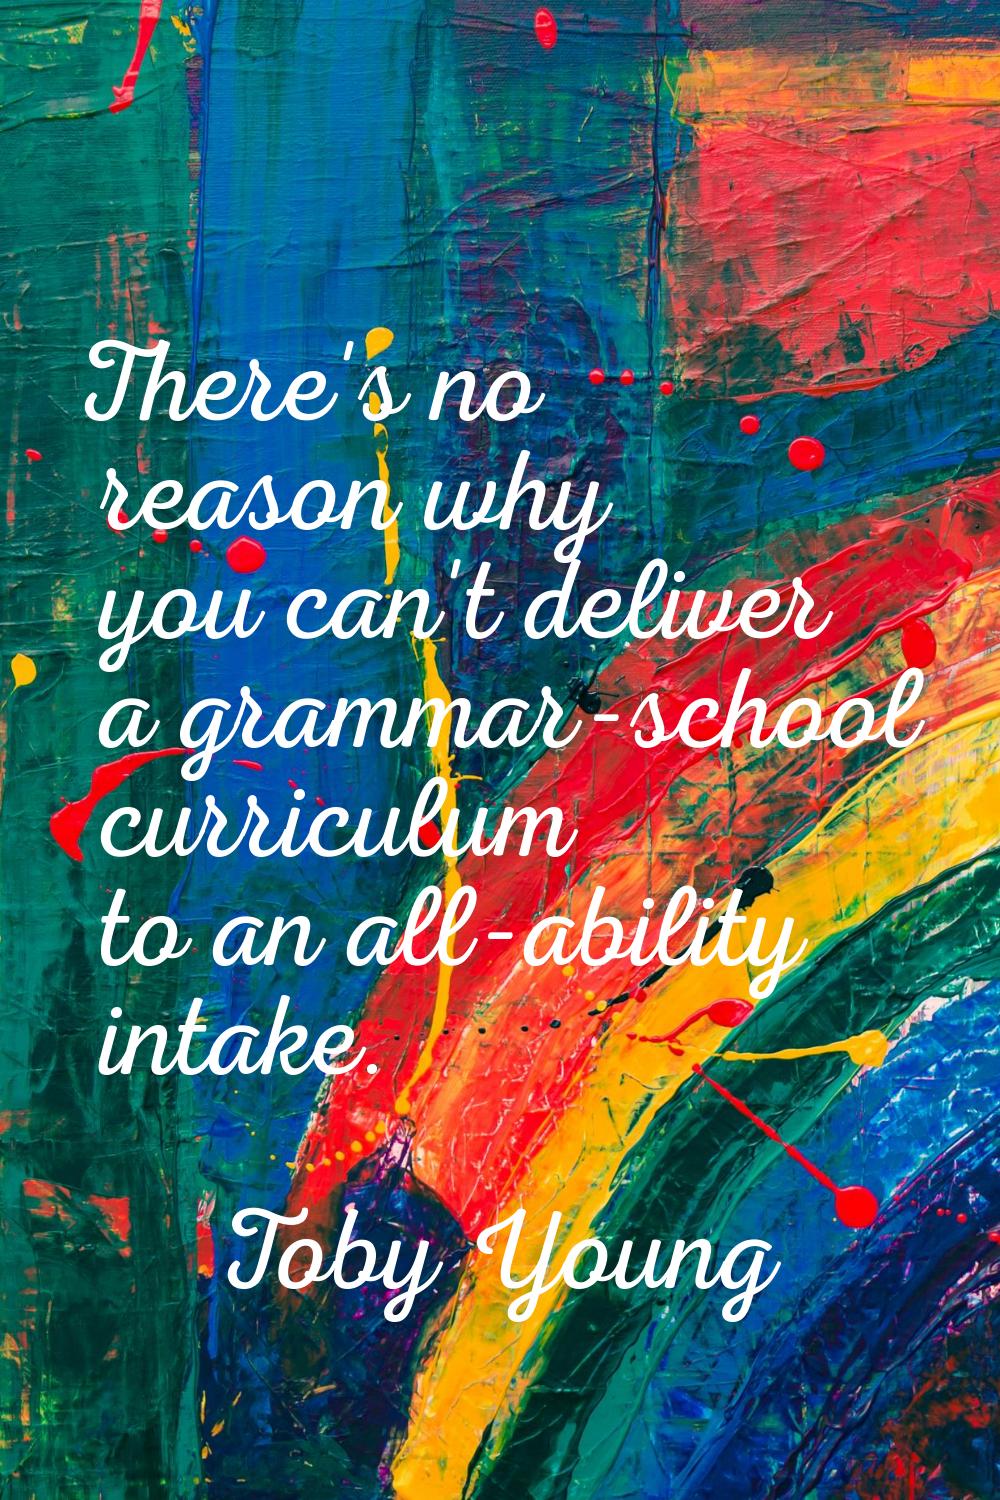 There's no reason why you can't deliver a grammar-school curriculum to an all-ability intake.